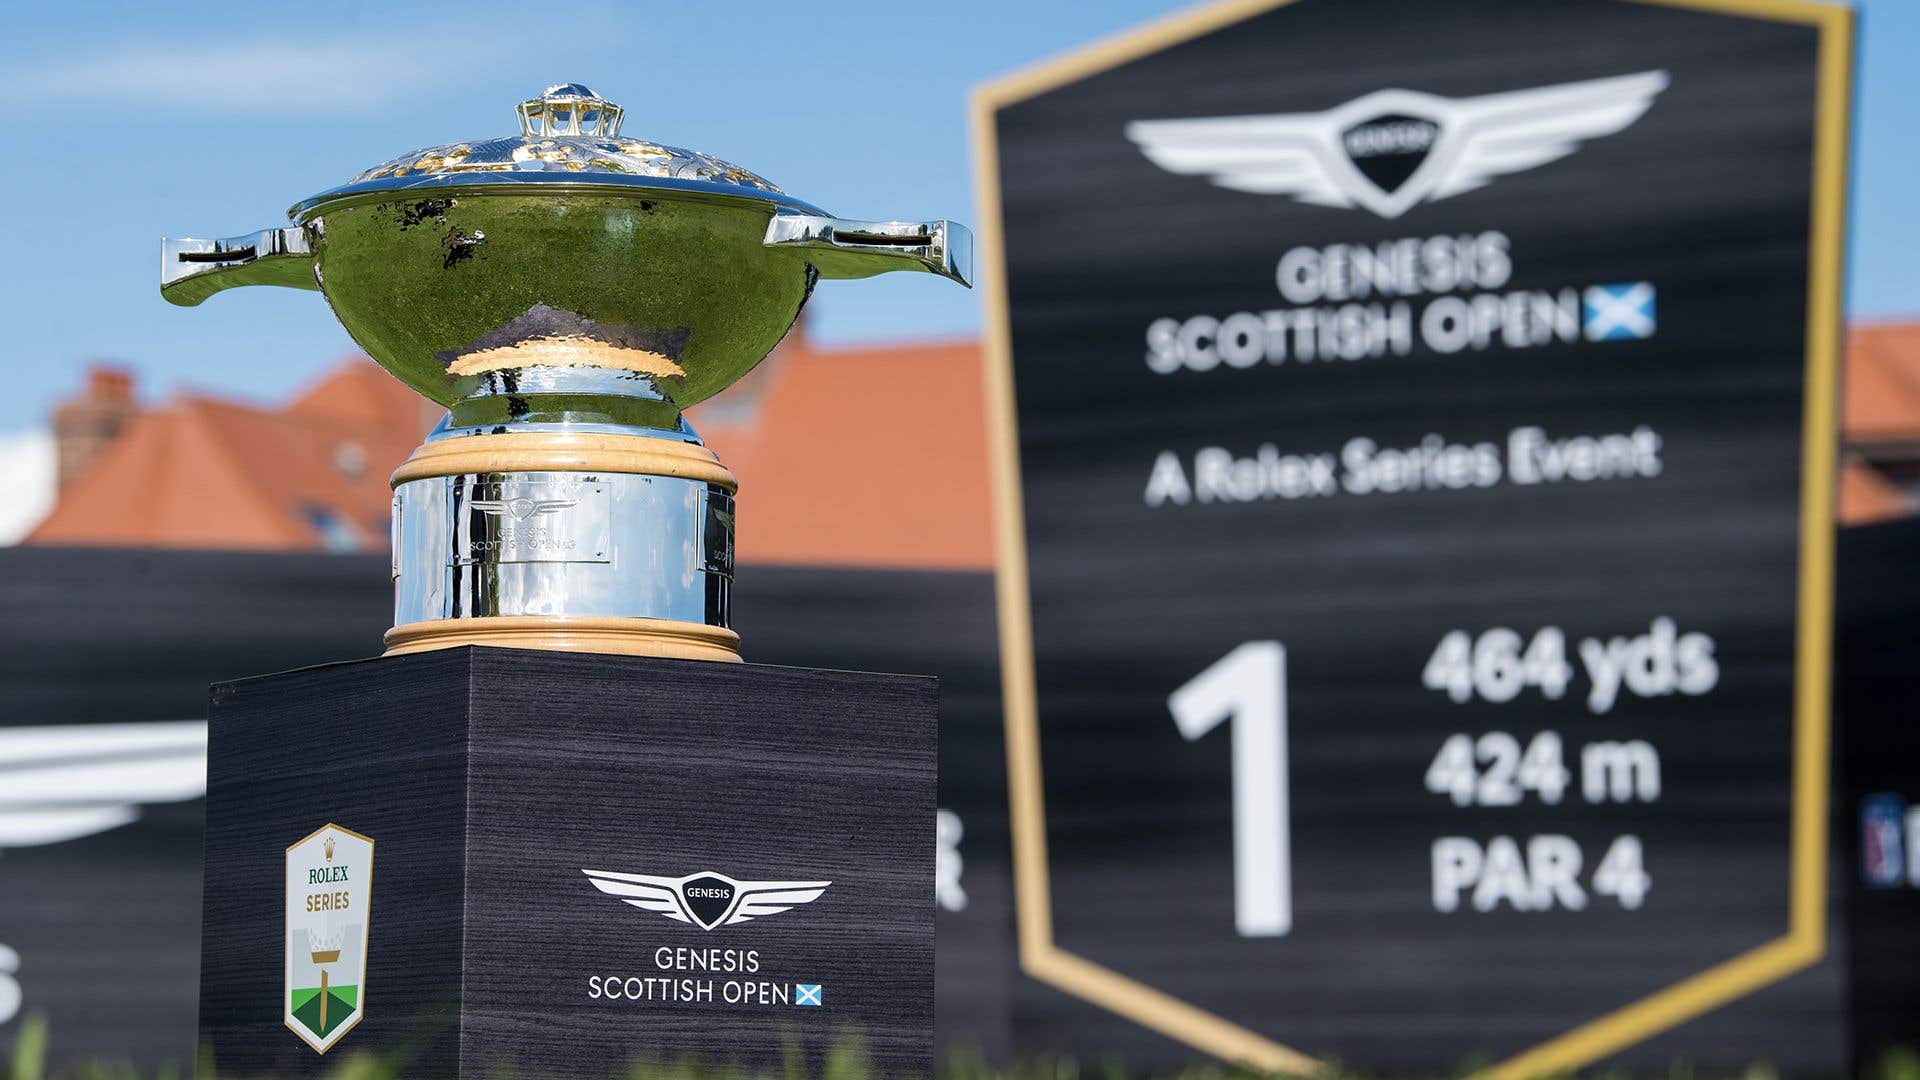 2023 Genesis Scottish Open How to watch Round 1 on Thursday